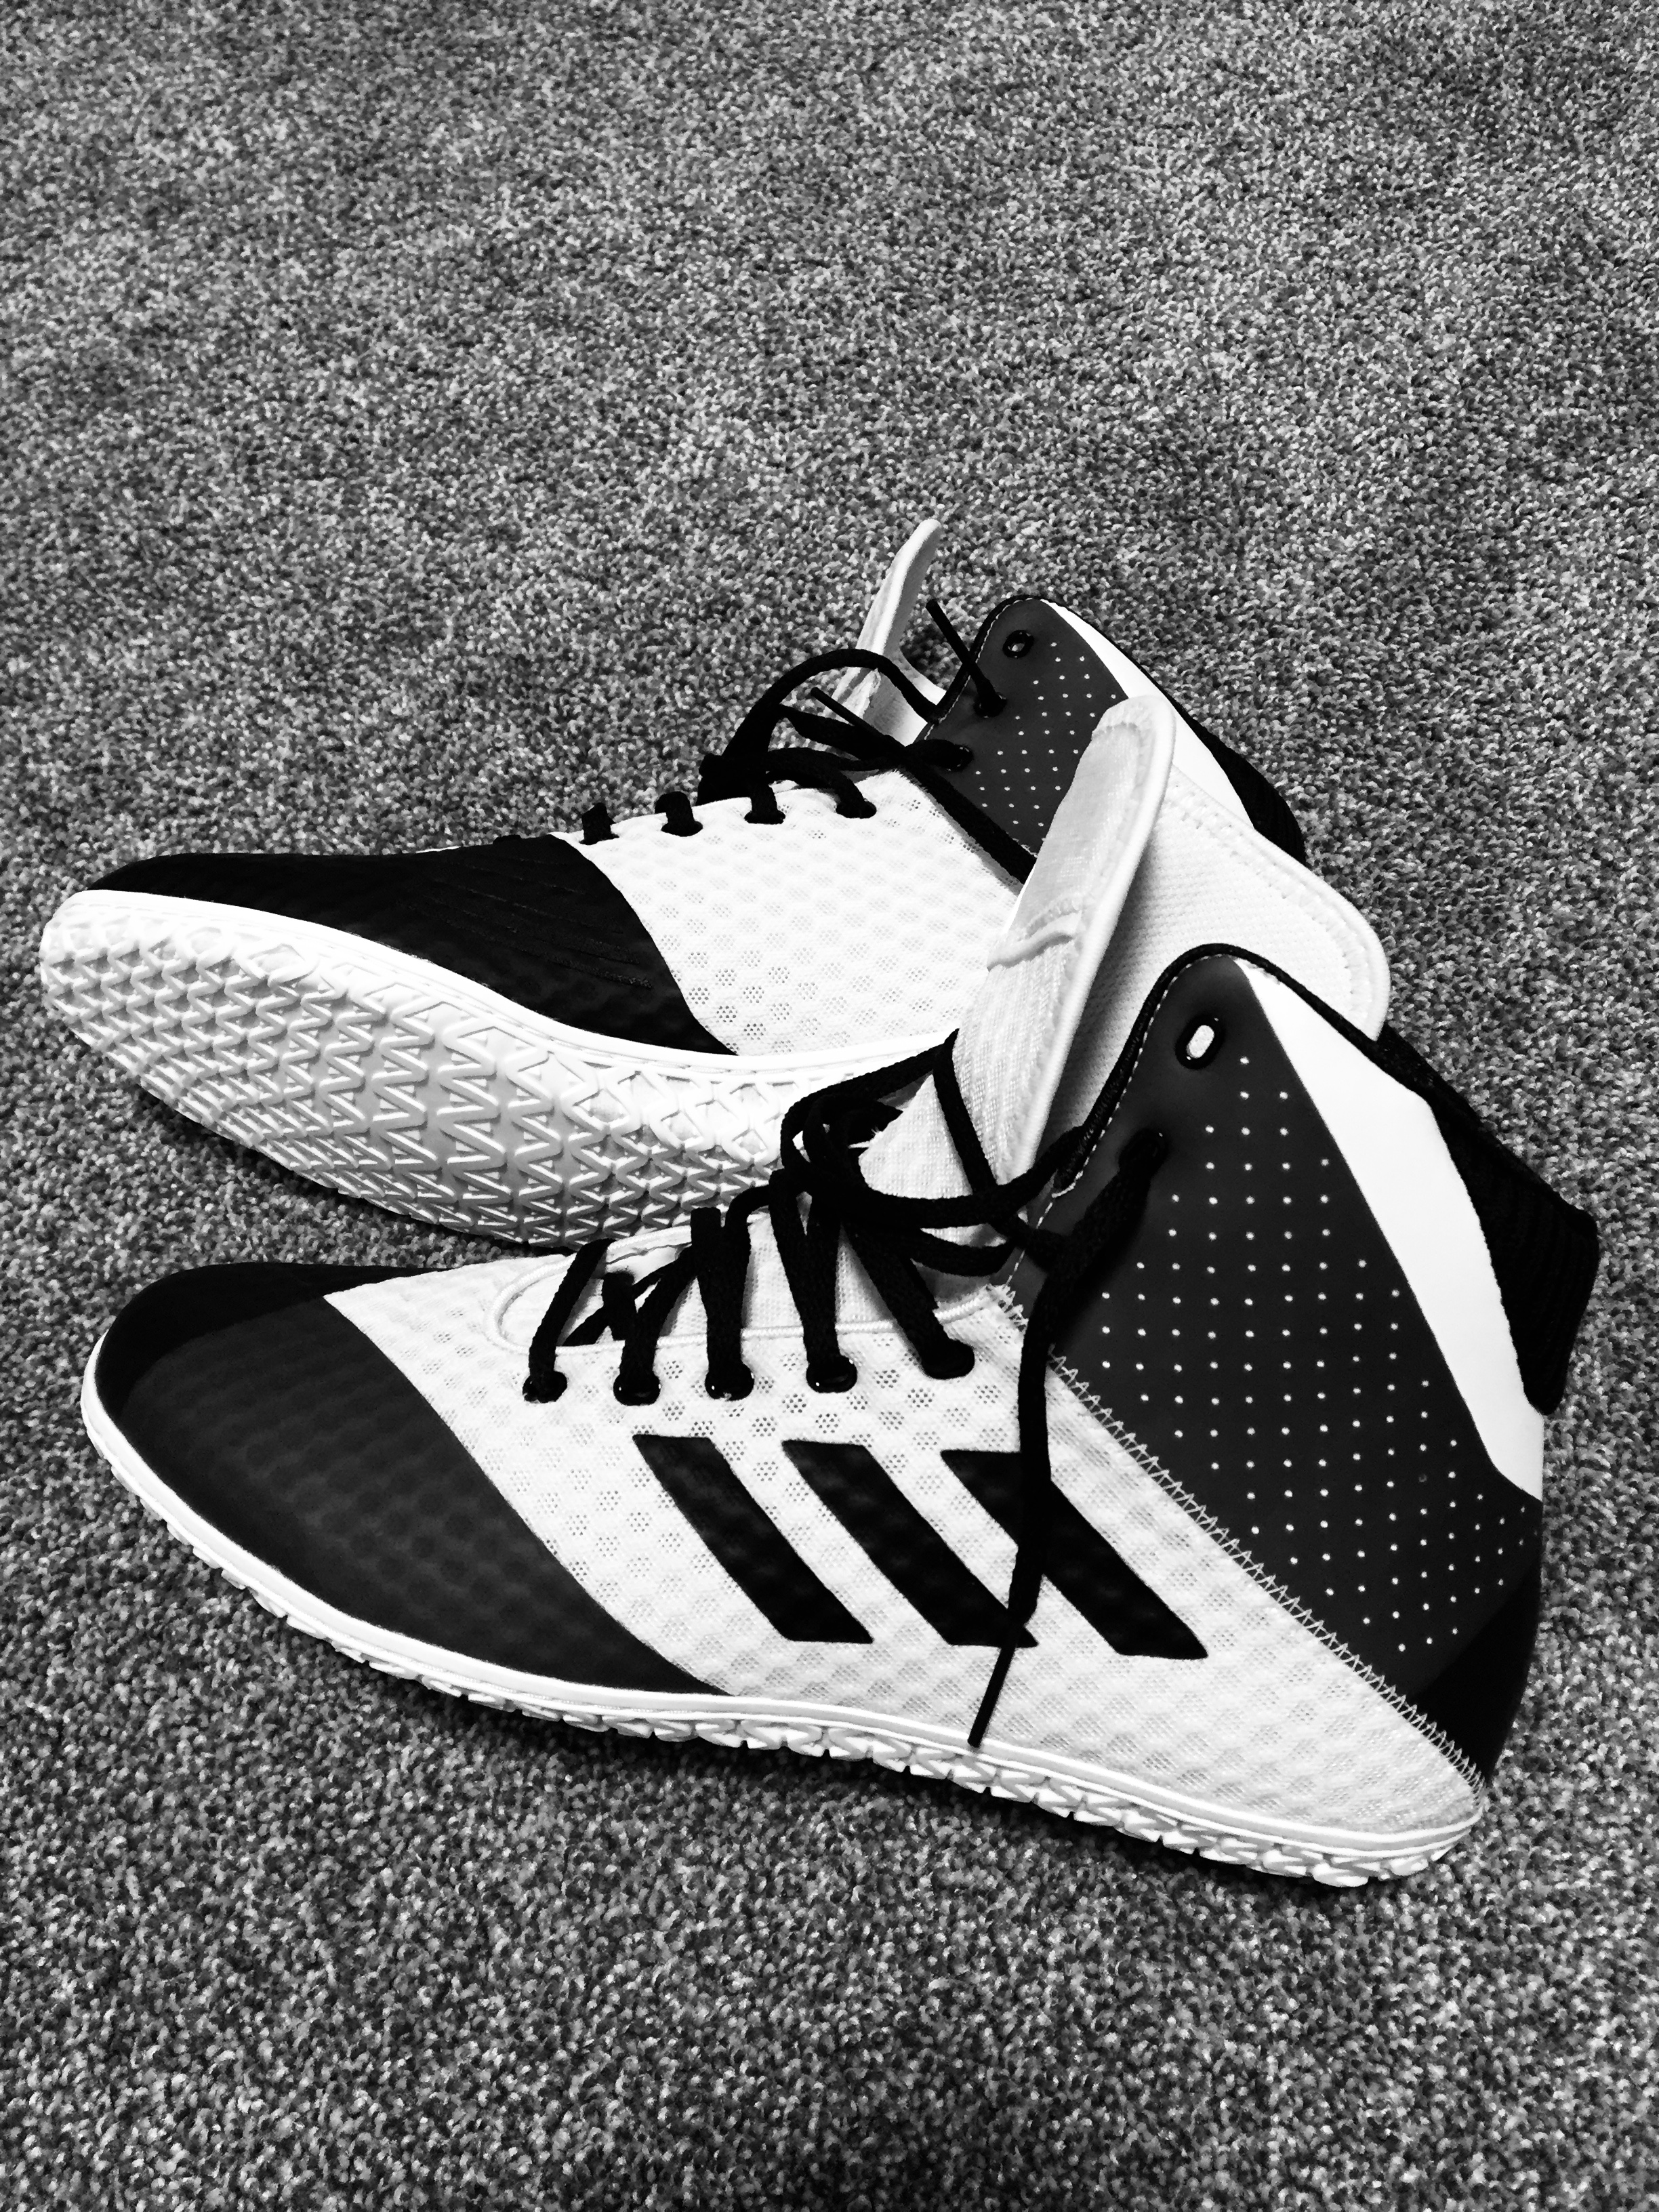 adidas mat wizard 4 wrestling shoes